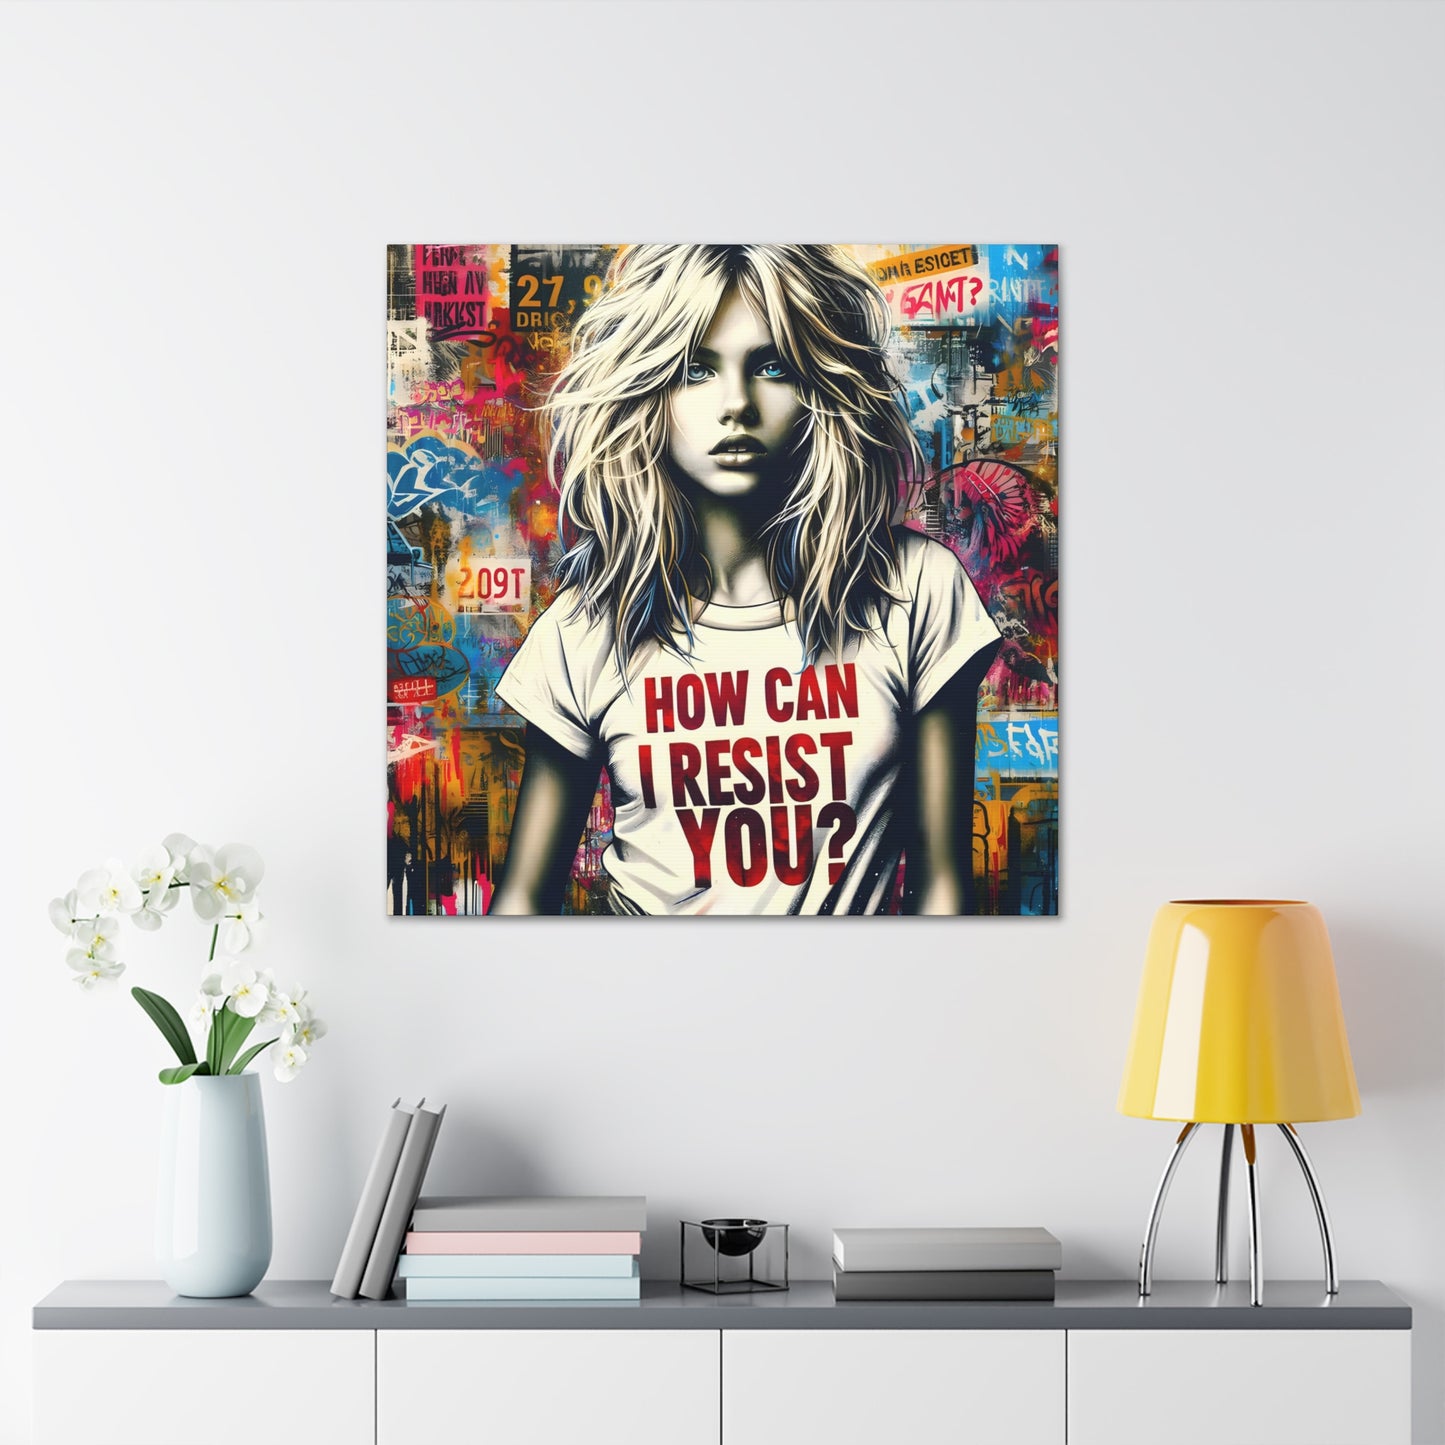 in situ desk and lamp AI-generated art, 'Resist You? – An ABBA Echo,' with a modern Aphrodite in urban setting, her shirt reading 'HOW CAN I RESIST YOU?' amidst colorful graffiti, echoing ABBA's themes.